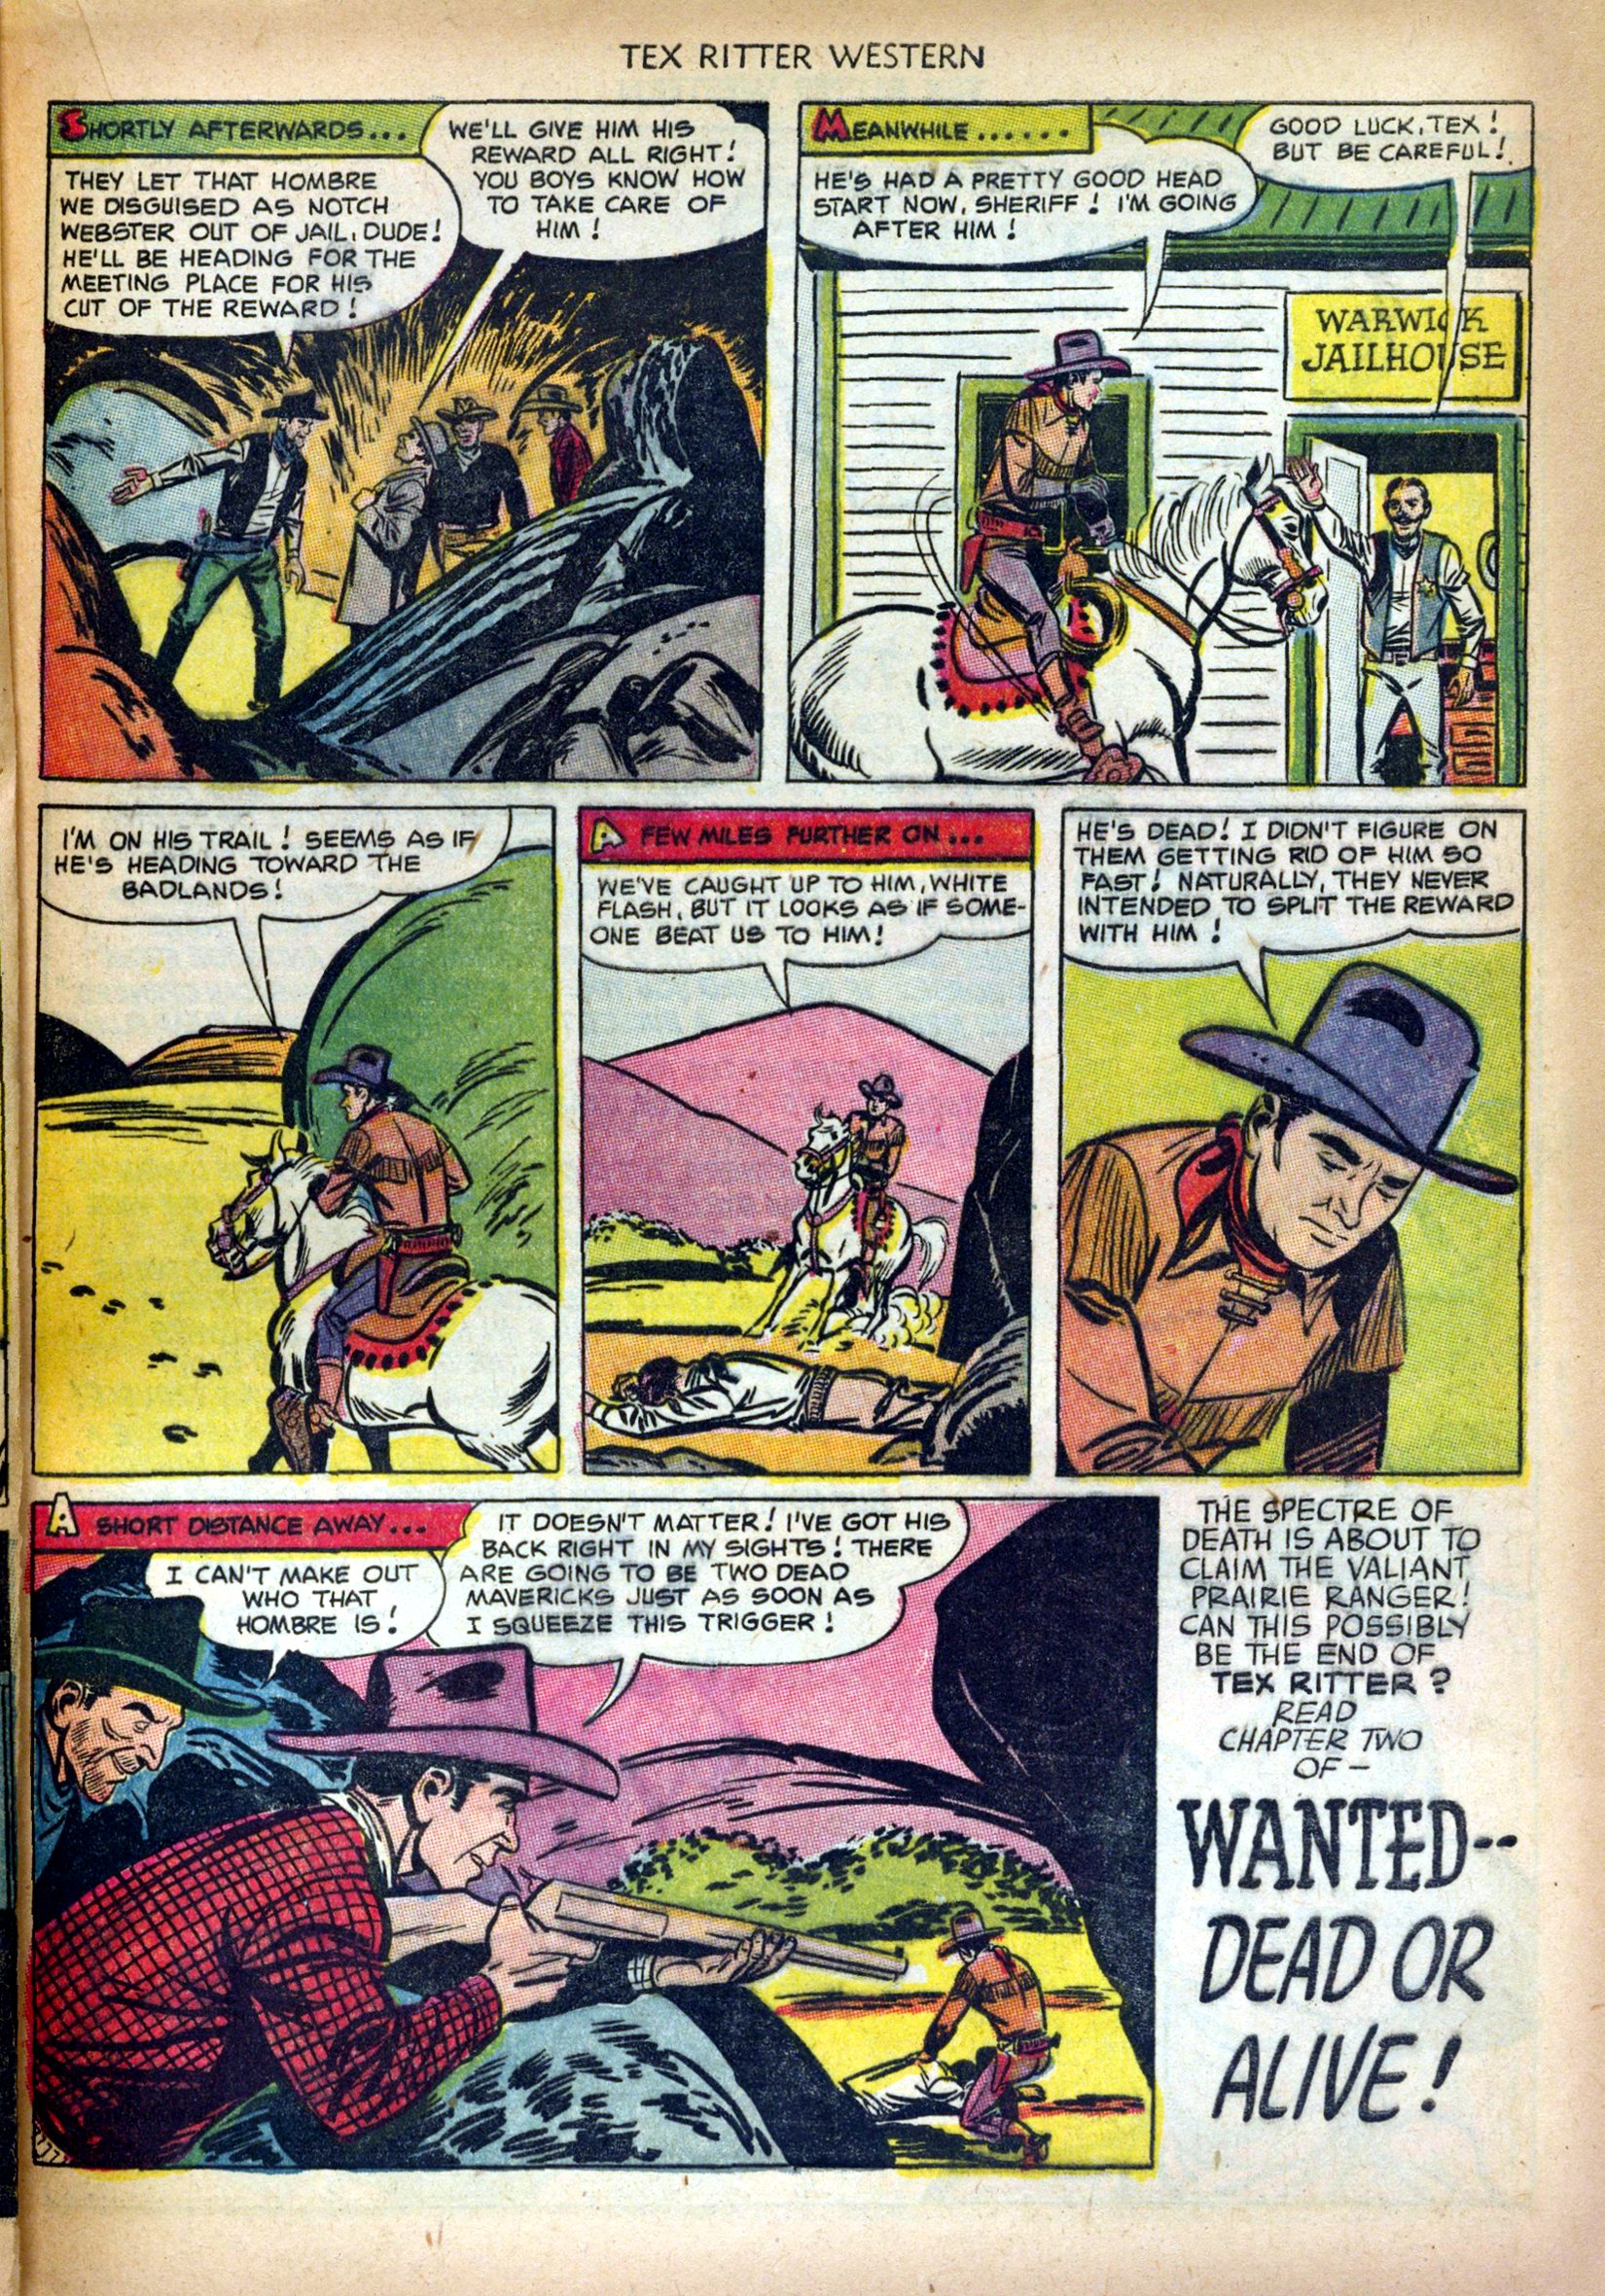 Read online Tex Ritter Western comic -  Issue #14 - 23